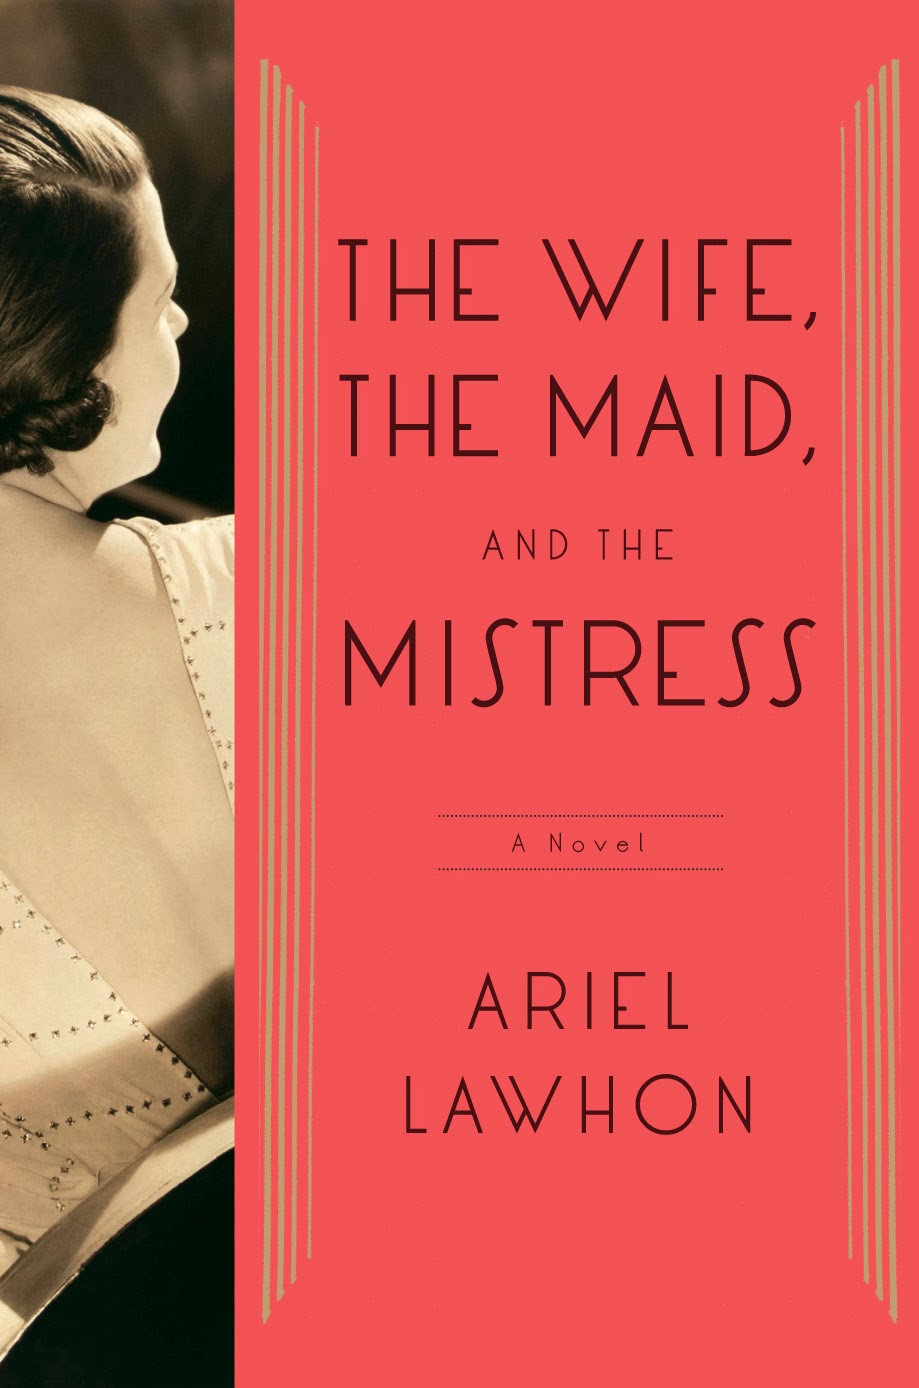 Review: The Wife, The Maid and The Mistress by Ariel Lawhon